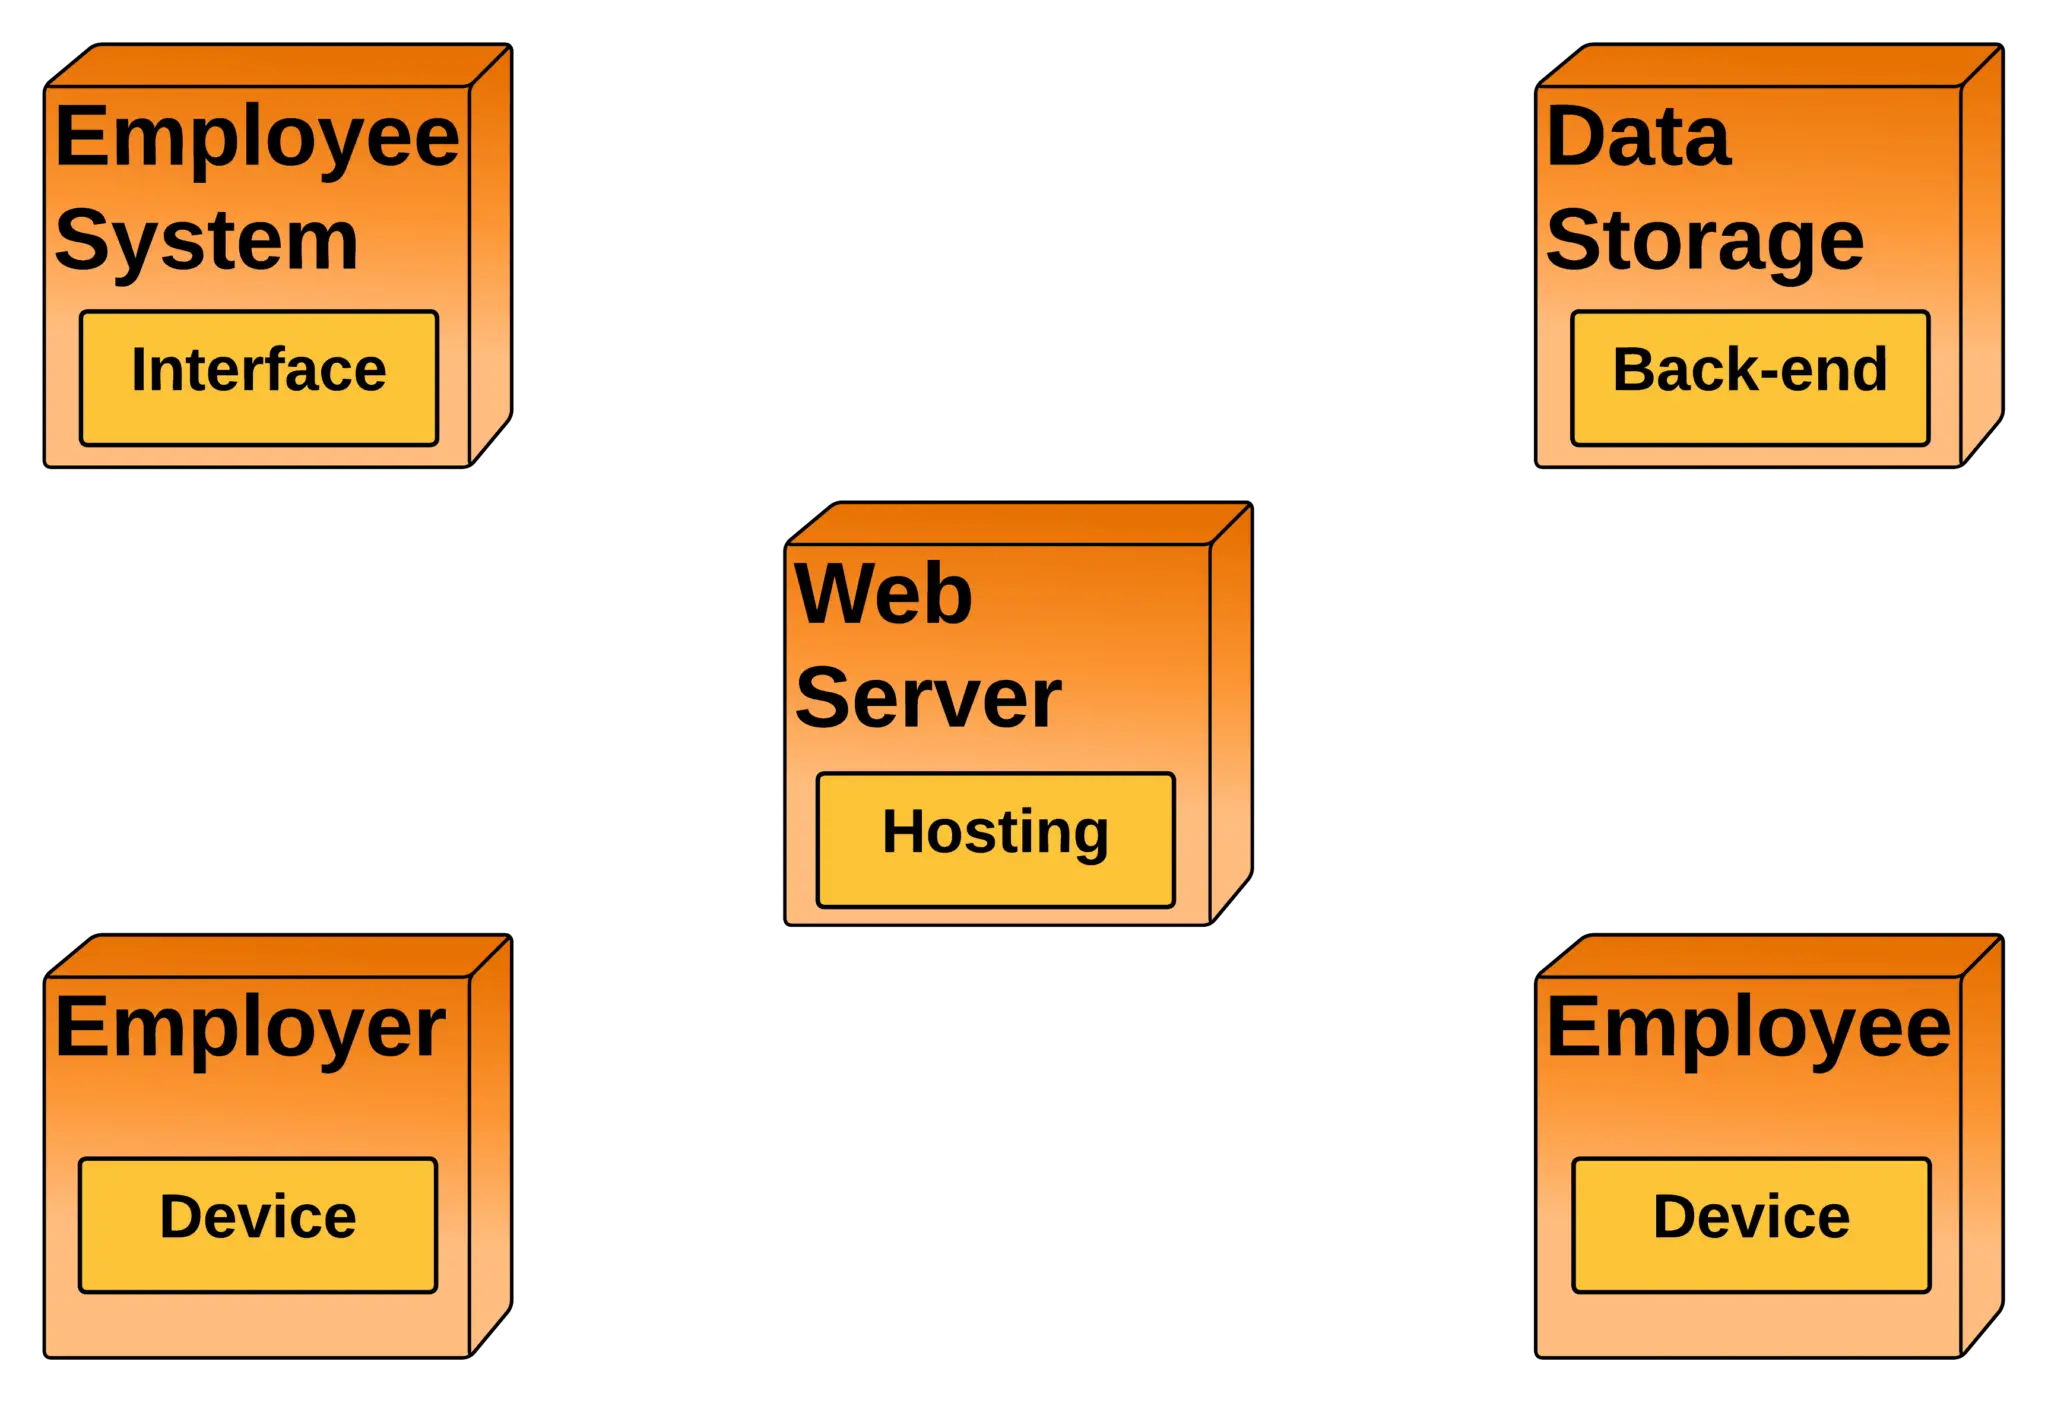 Deployment Diagram For Employee Management System